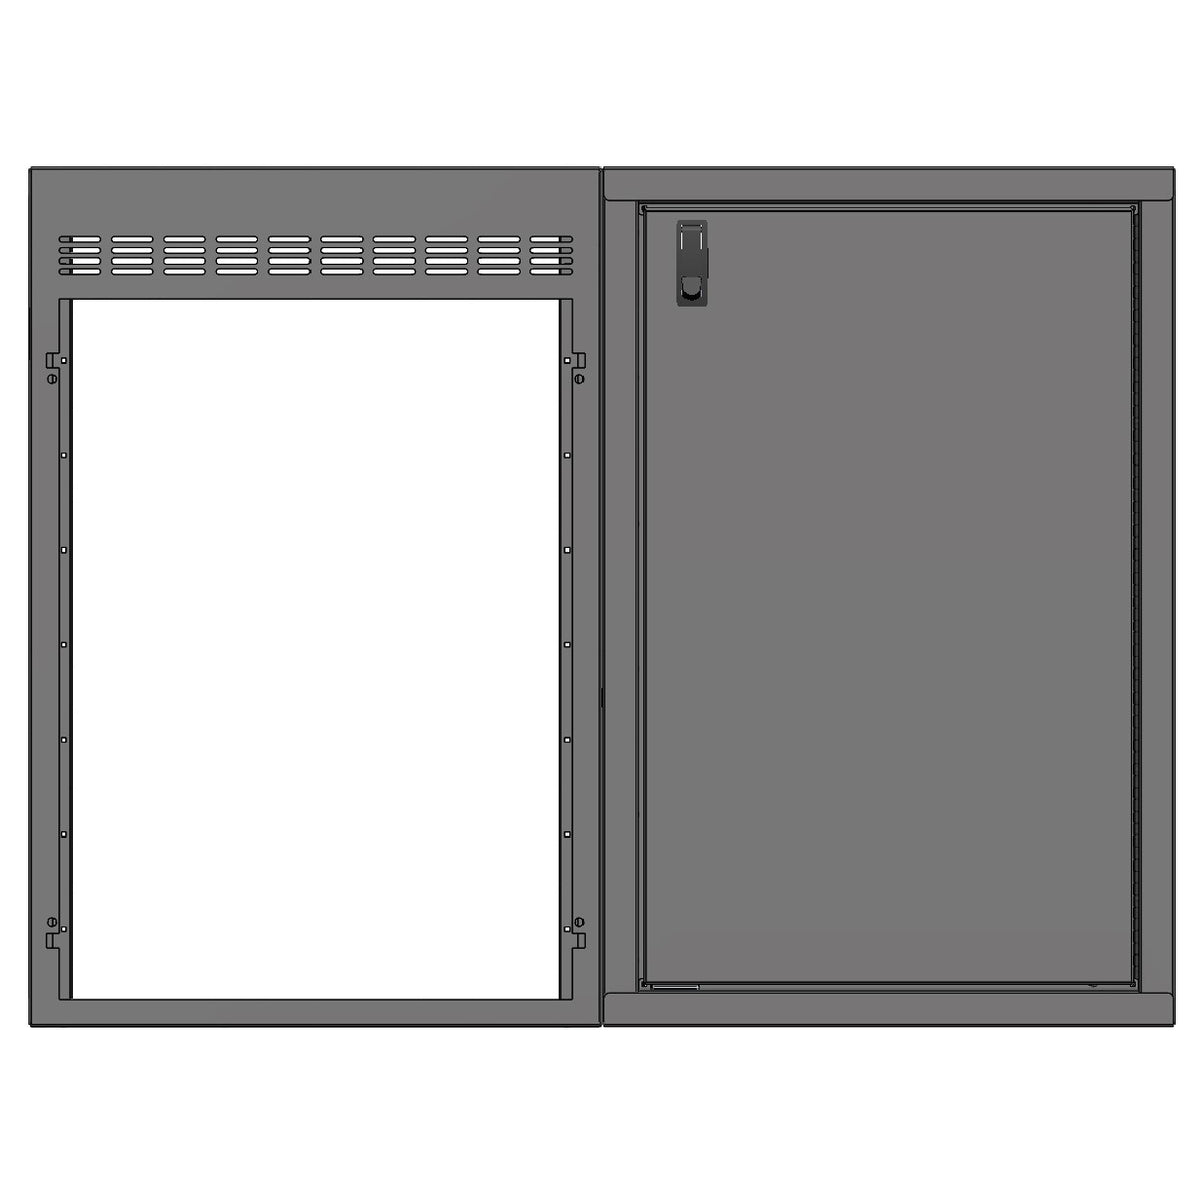 48in Galley - Isotherm 130 Fridge Base Cabinet